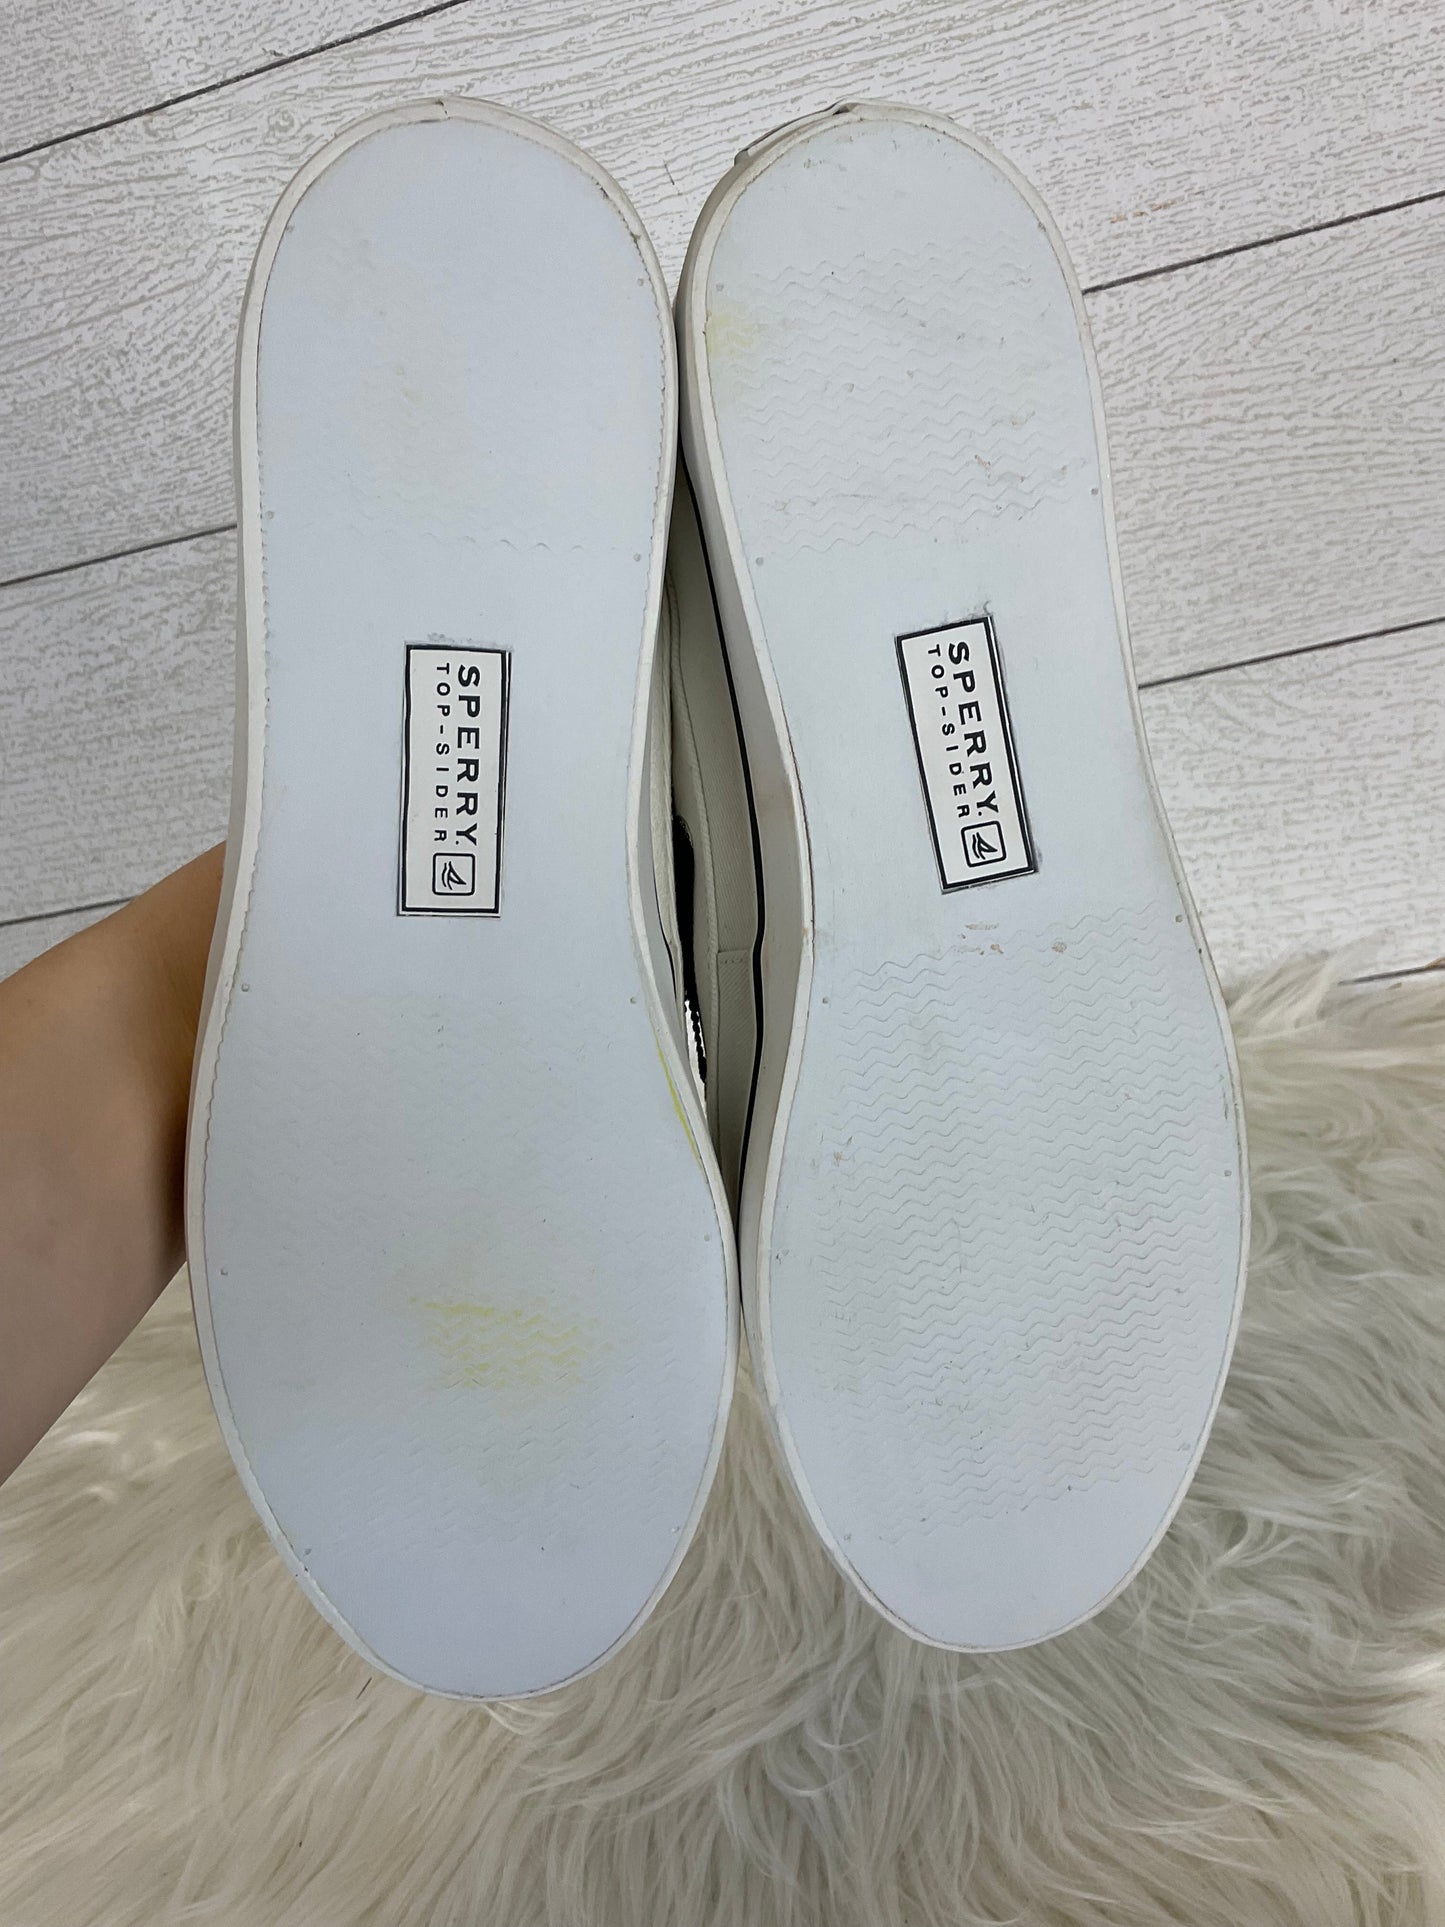 White Shoes Flats Sperry, Size 9.5